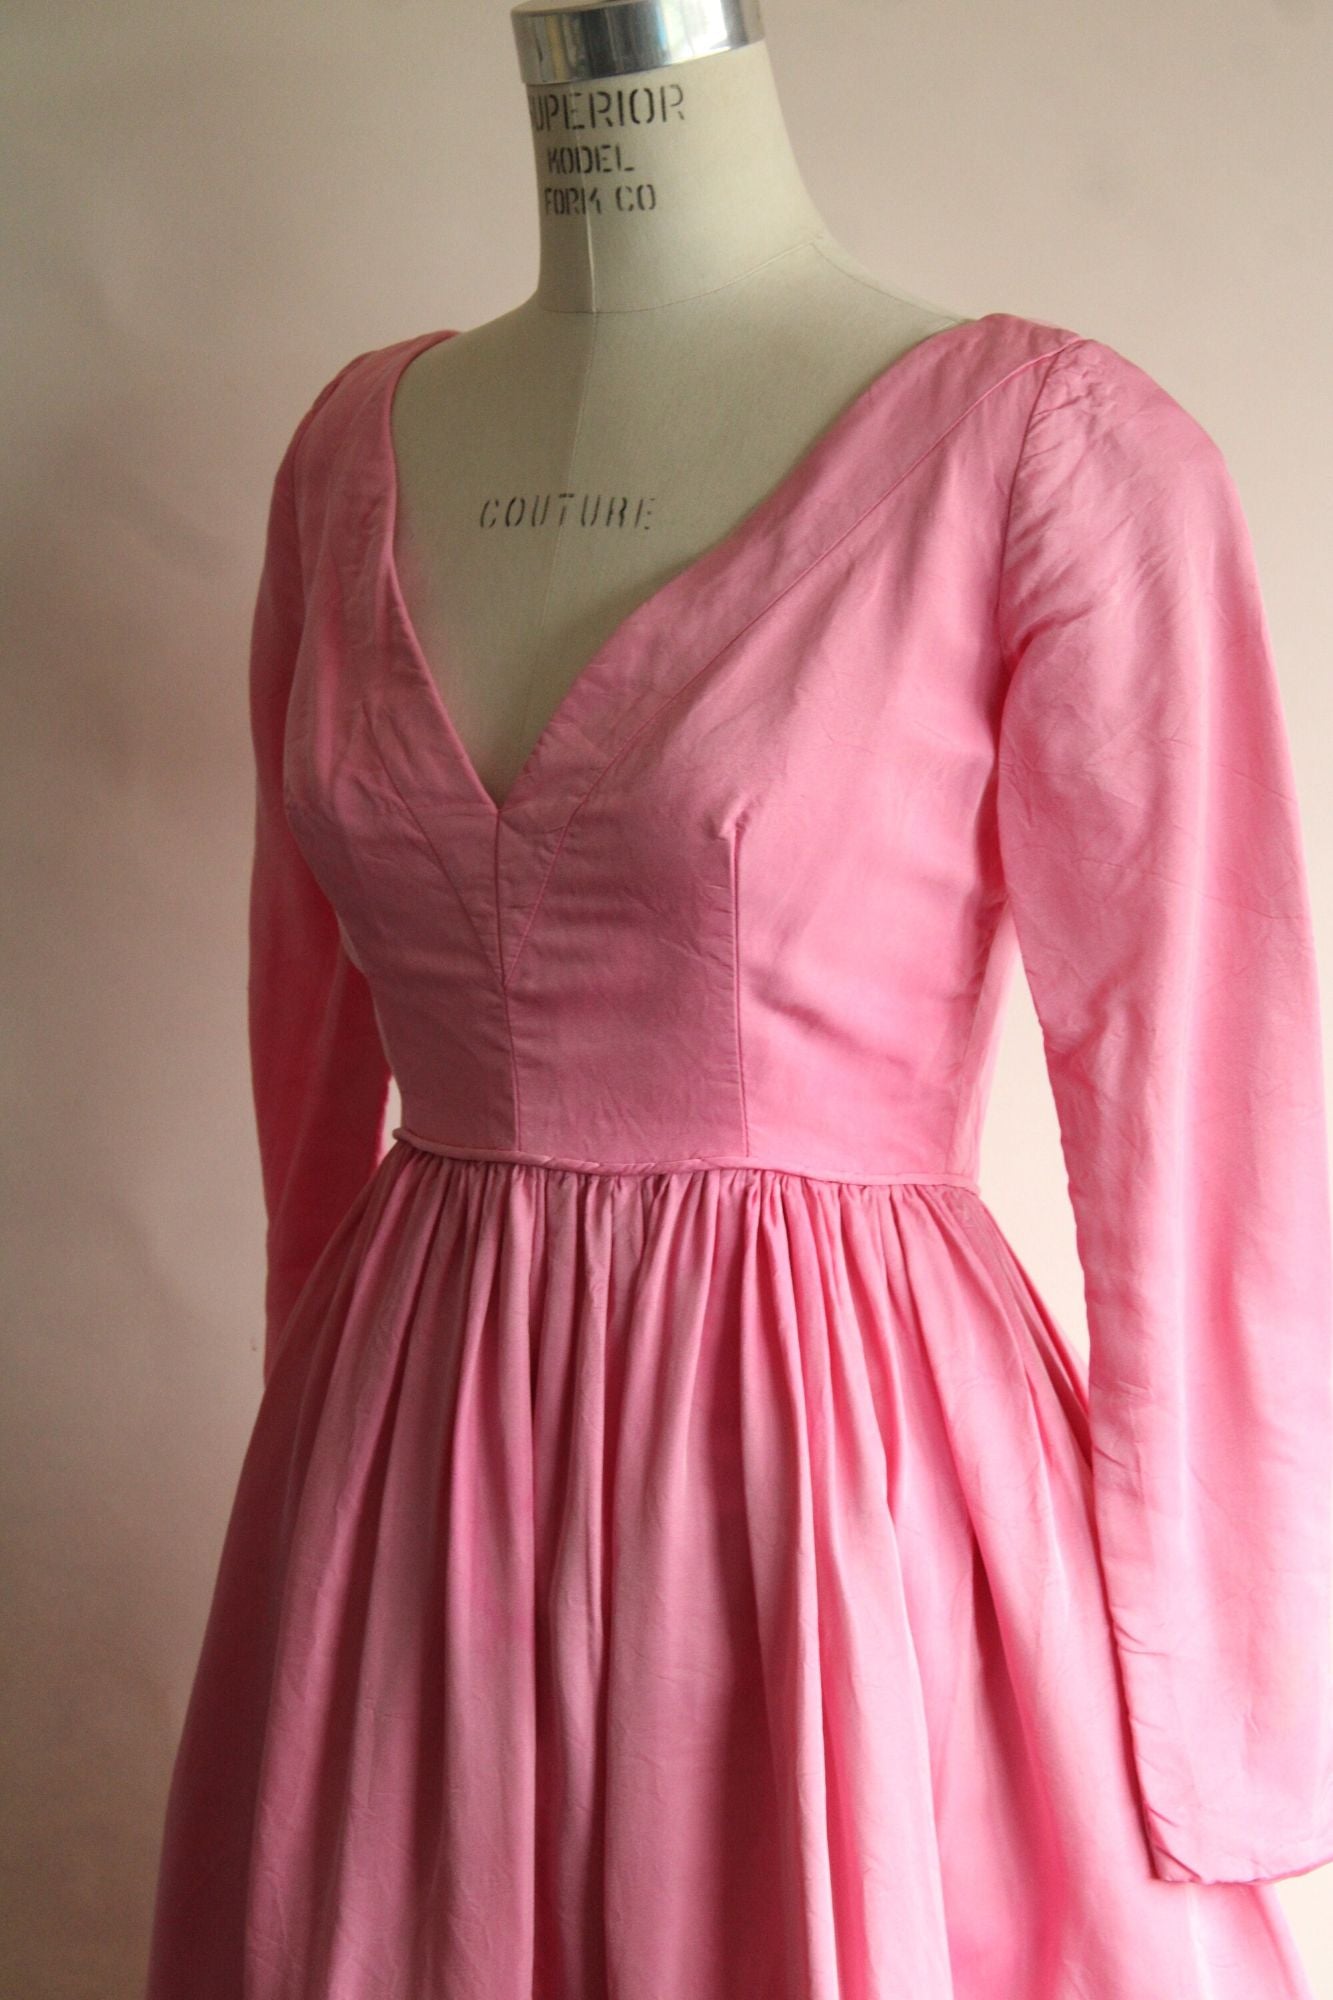 Vintage 1960s Modern Couture Original Pink Fit and Flare Dress with pockets